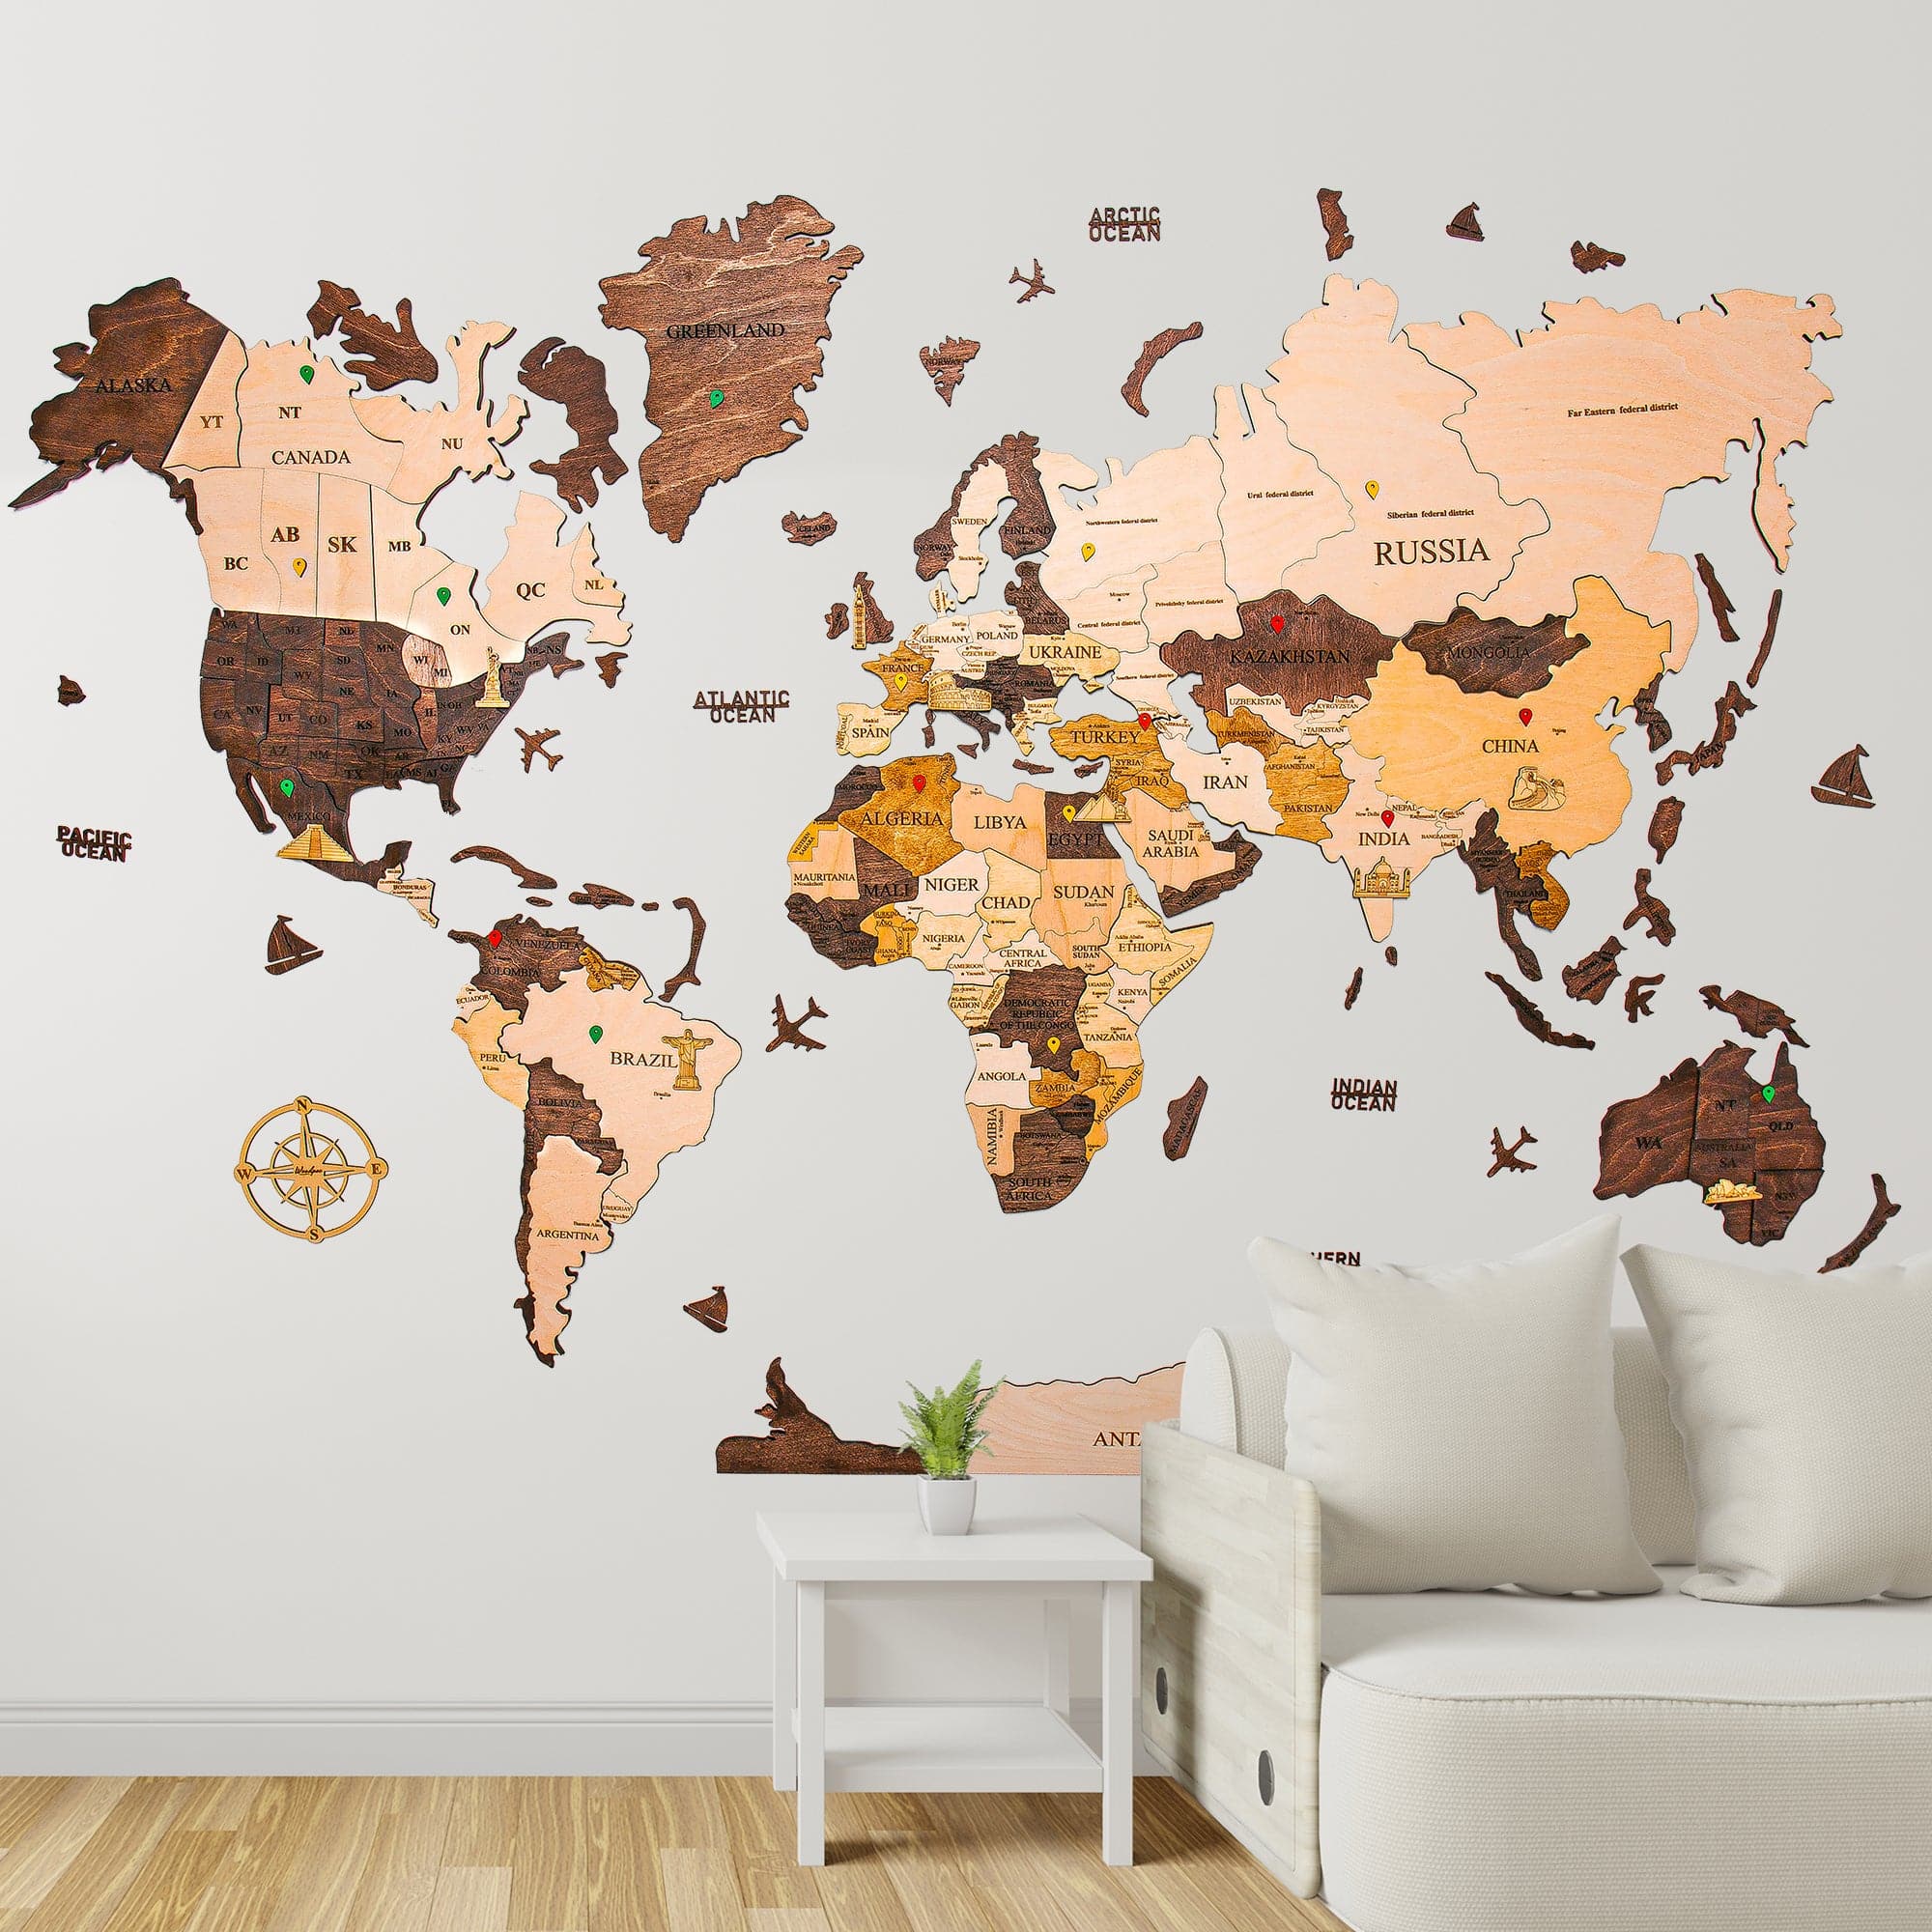 3D Wooden World Map - Multicolored 04 XXXL Full Pack